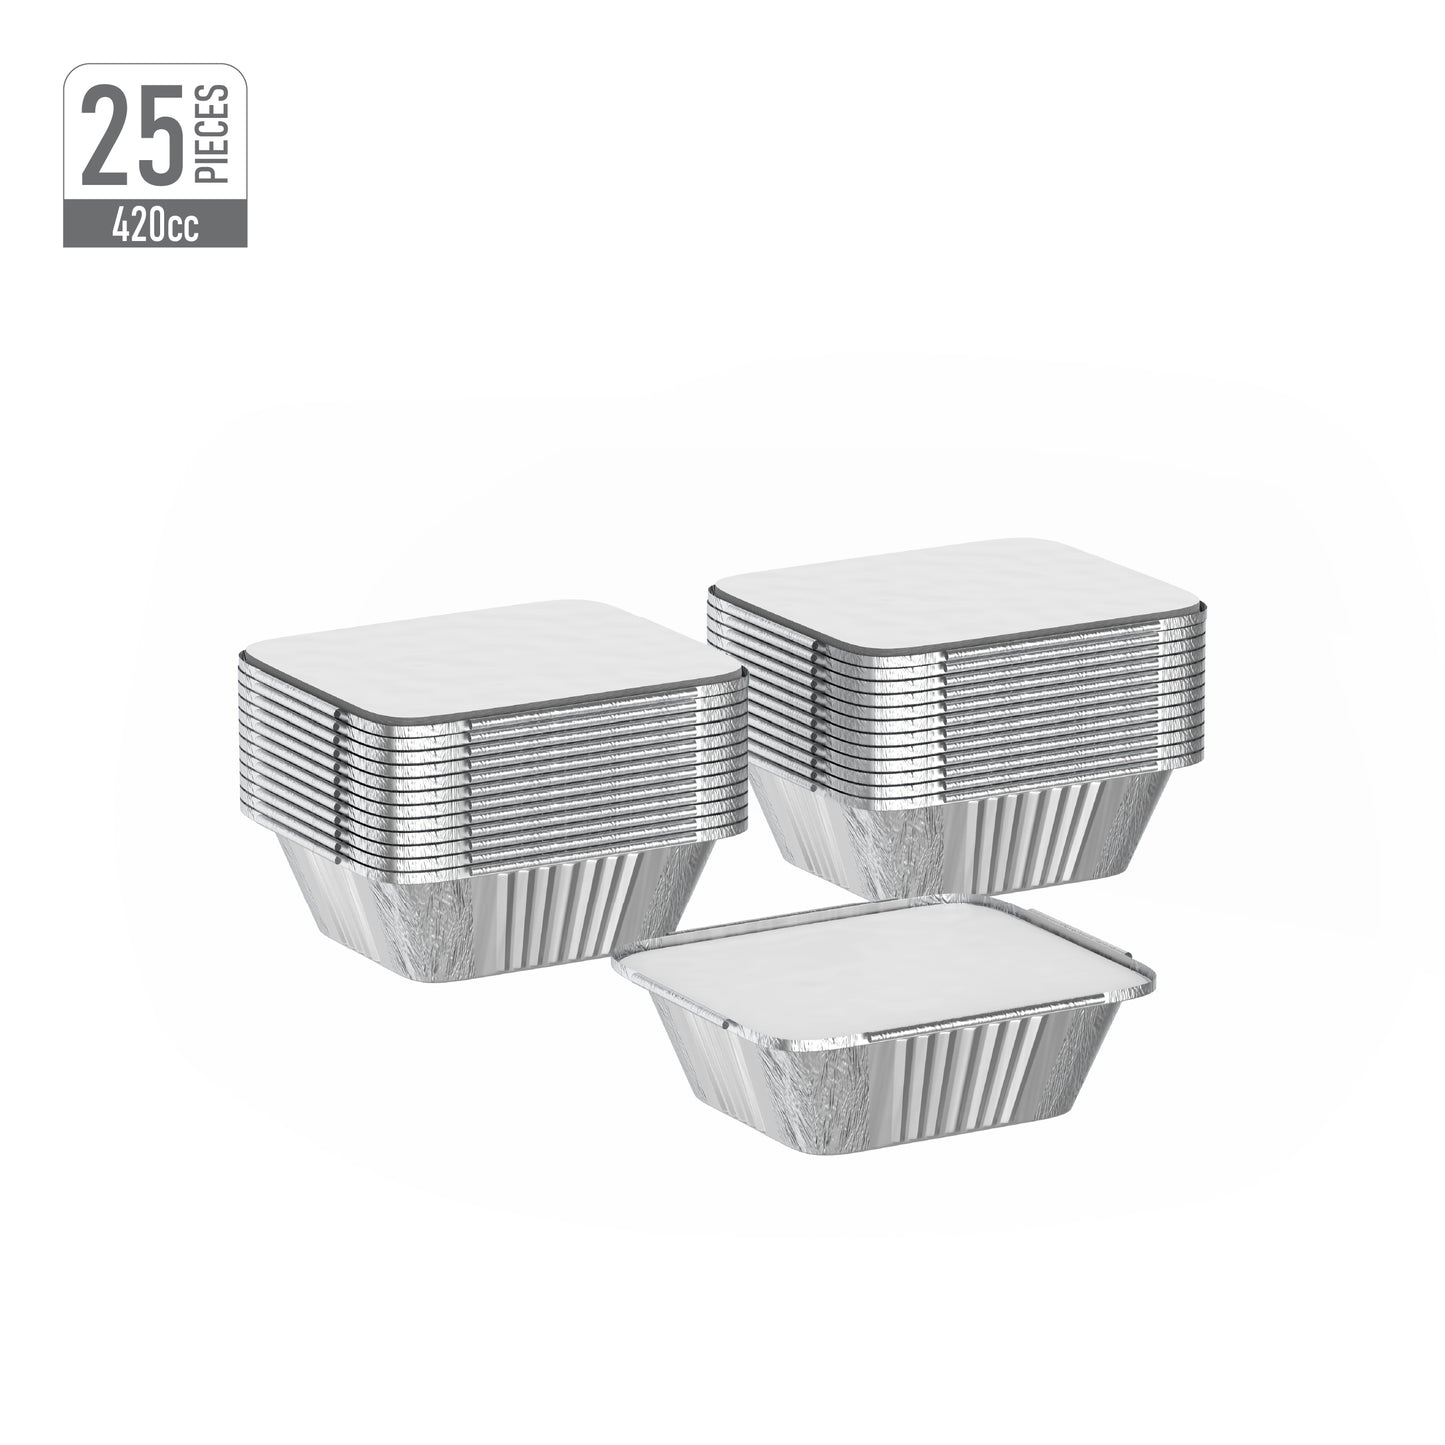 420 cc Pack of 25 Aluminium Containers with Lids